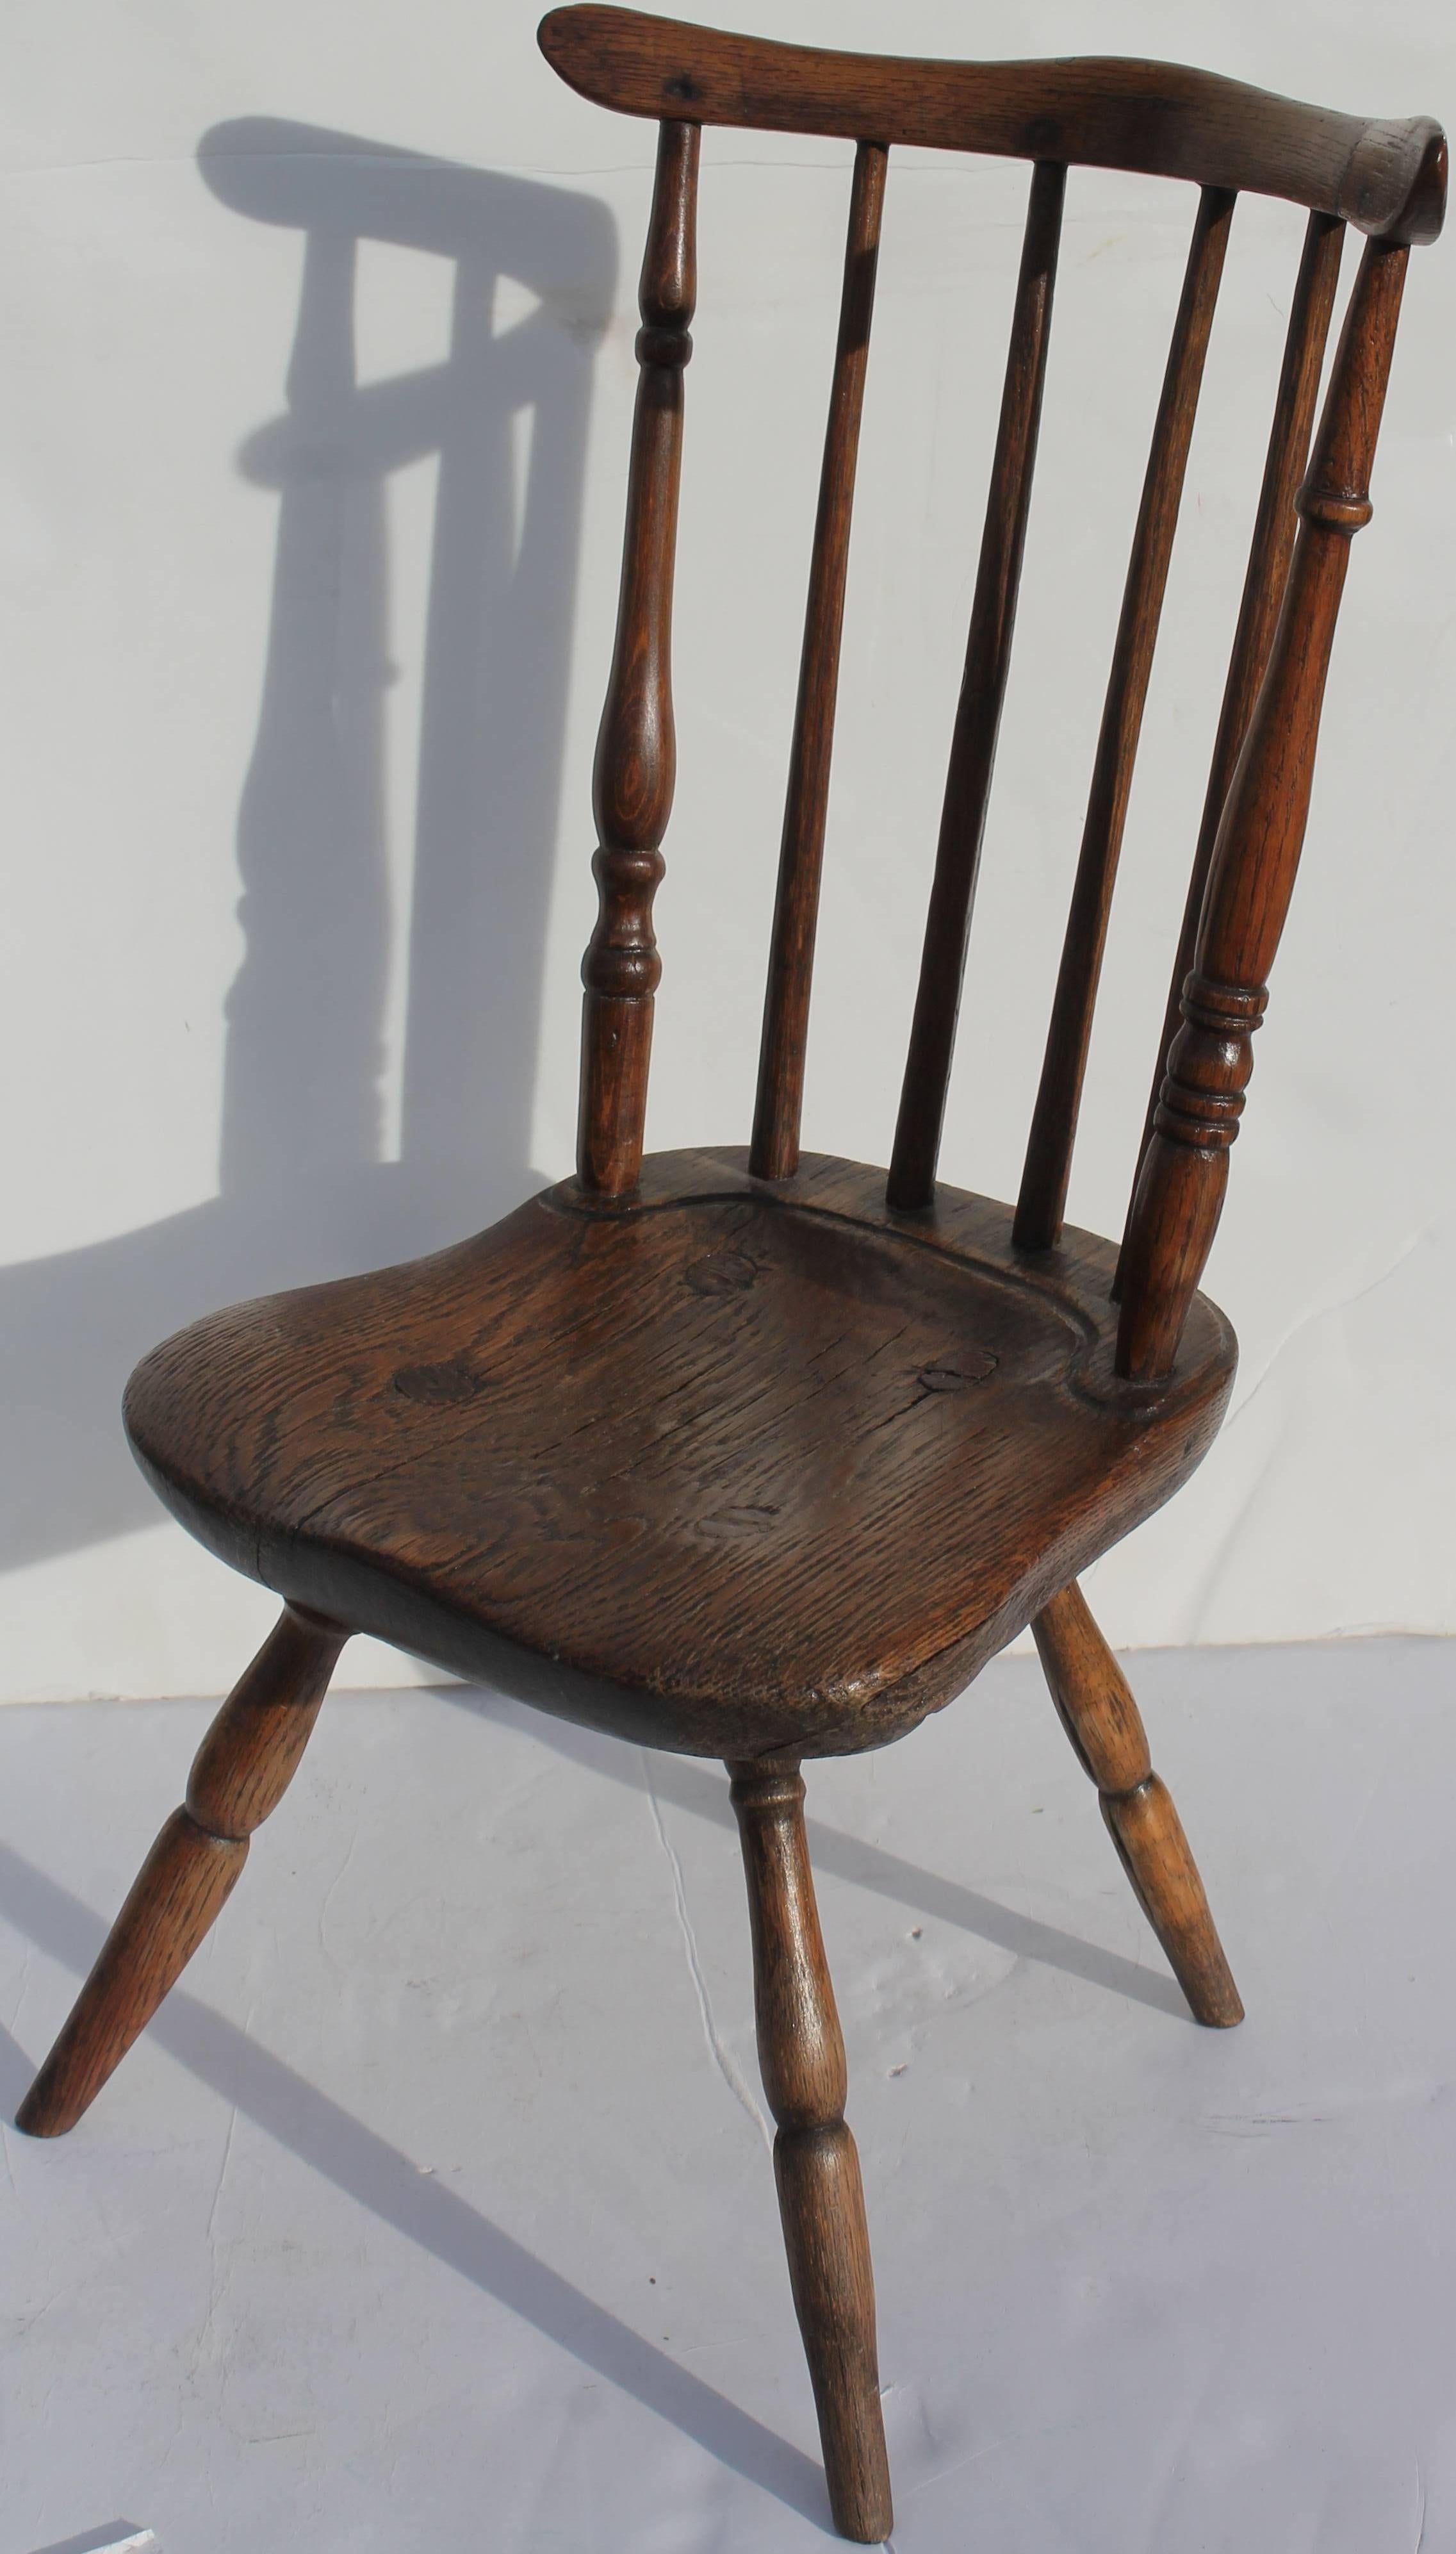 The form of this amazing little wonder is just fantastic. The condition is very good with a wonderful aged patina. The construction is early wood pegs and small square nails. The legs are mortised through to the seat. This is a rare find.